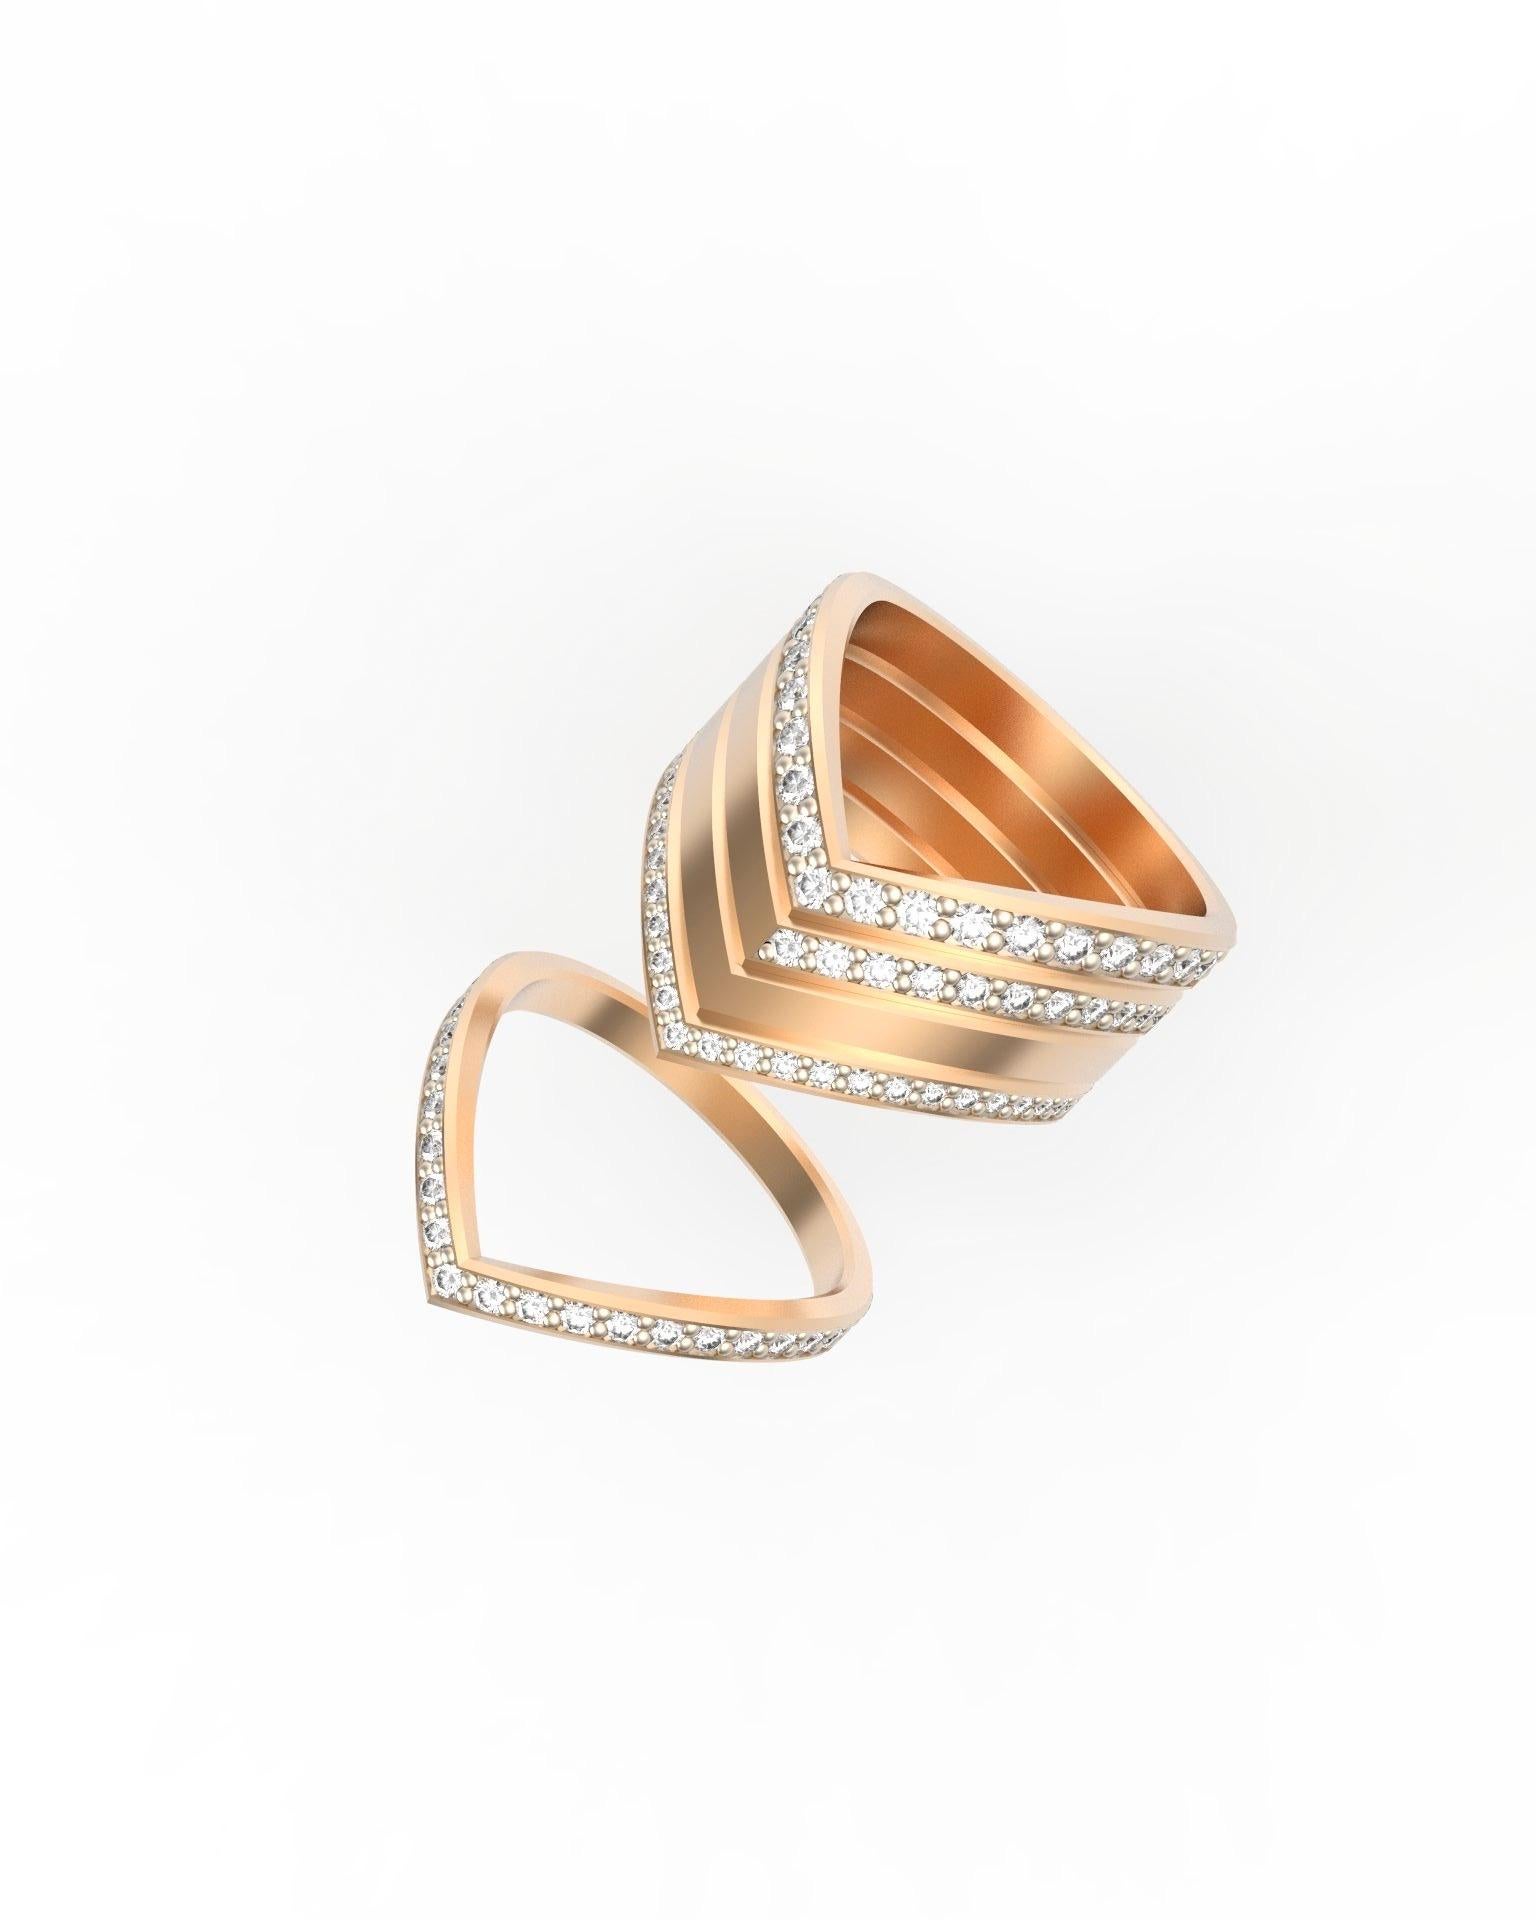 Brilliant Cut 18K Matt Rose Gold Ring with White Diamonds 0.10 Carats For Sale